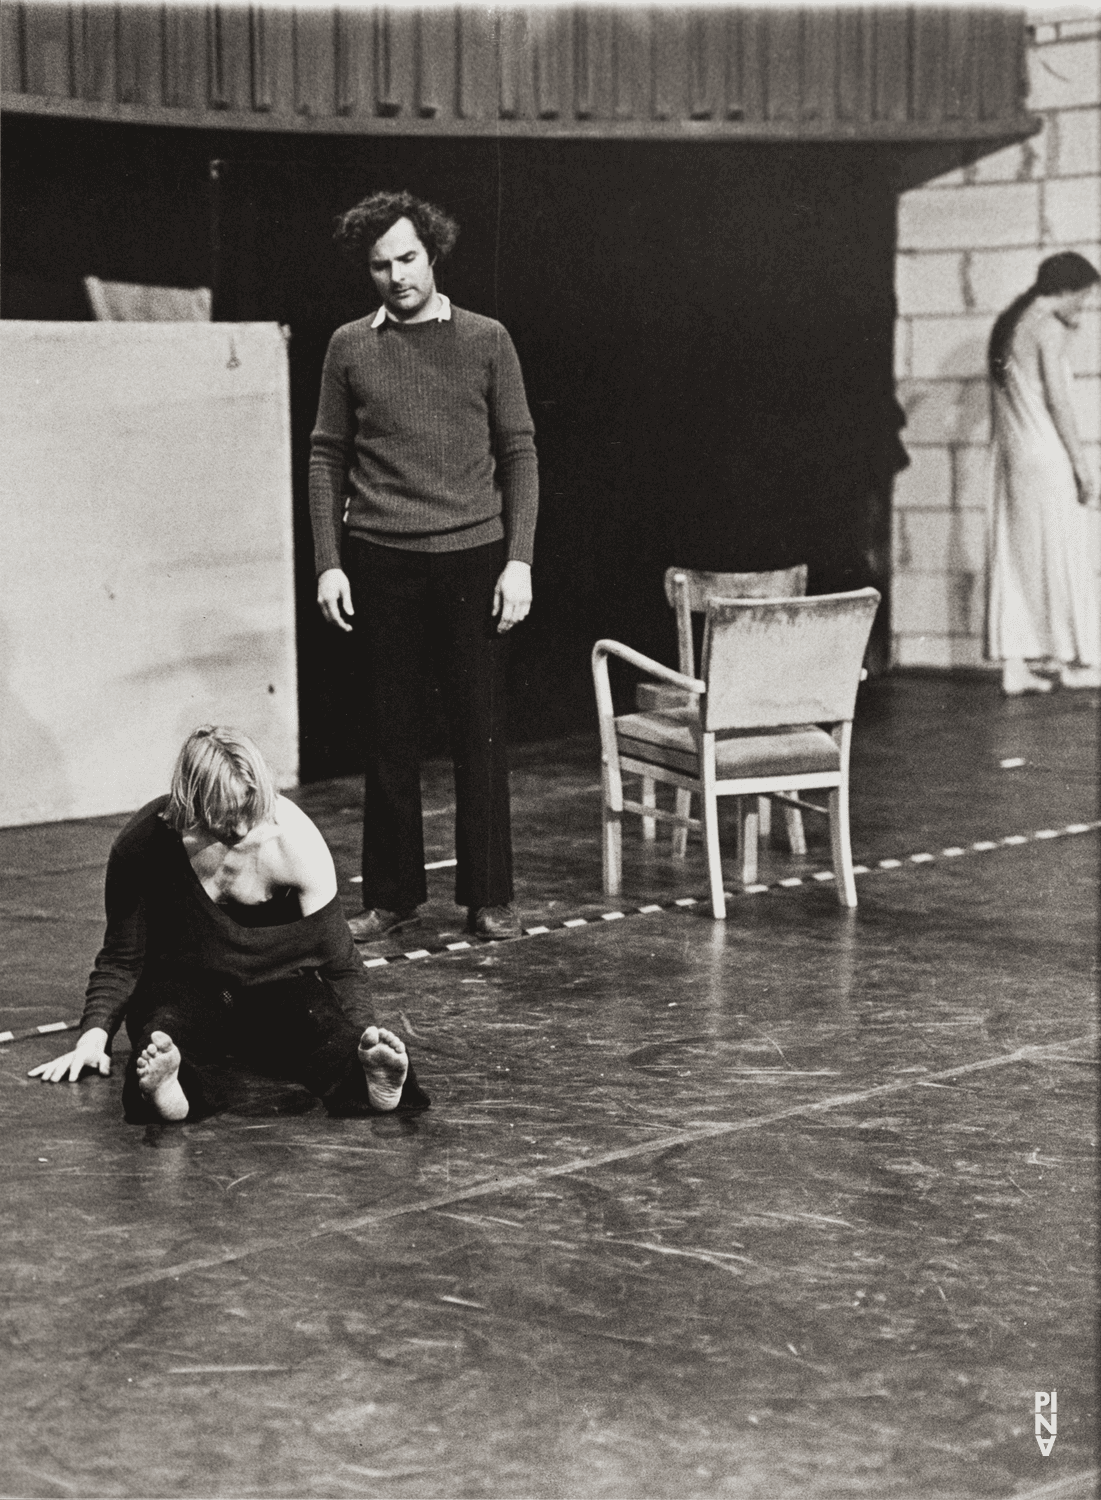 Dominique Mercy and Rolf Borzik in “Café Müller” by Pina Bausch